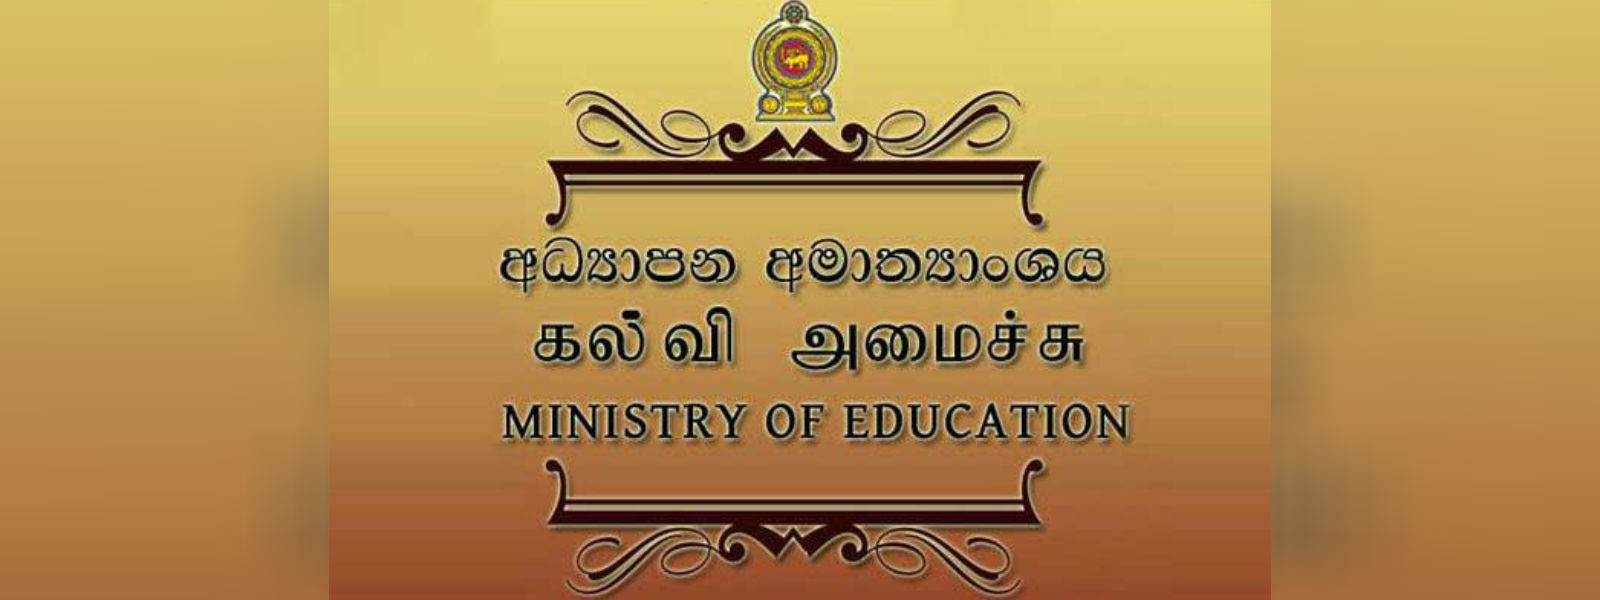 Training Colleges to be converted to degree inst.